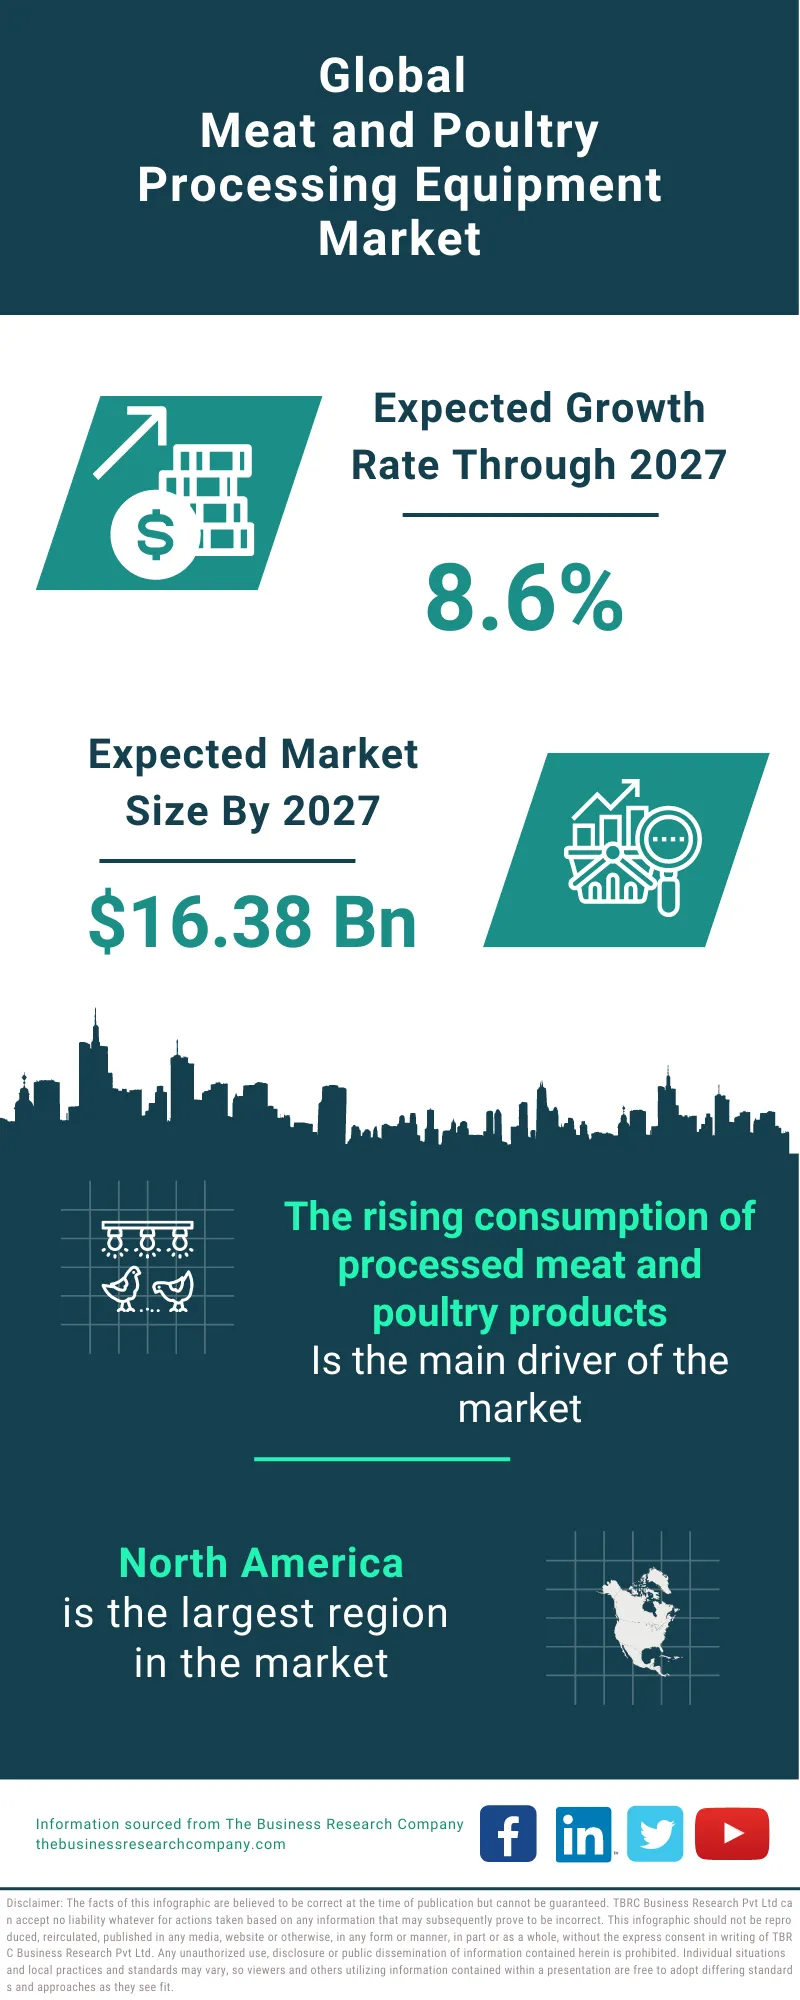 https://www.thebusinessresearchcompany.com/infographimages/230501_GMR_Meat_And_Poultry_Processing_Equipment_Market.webp